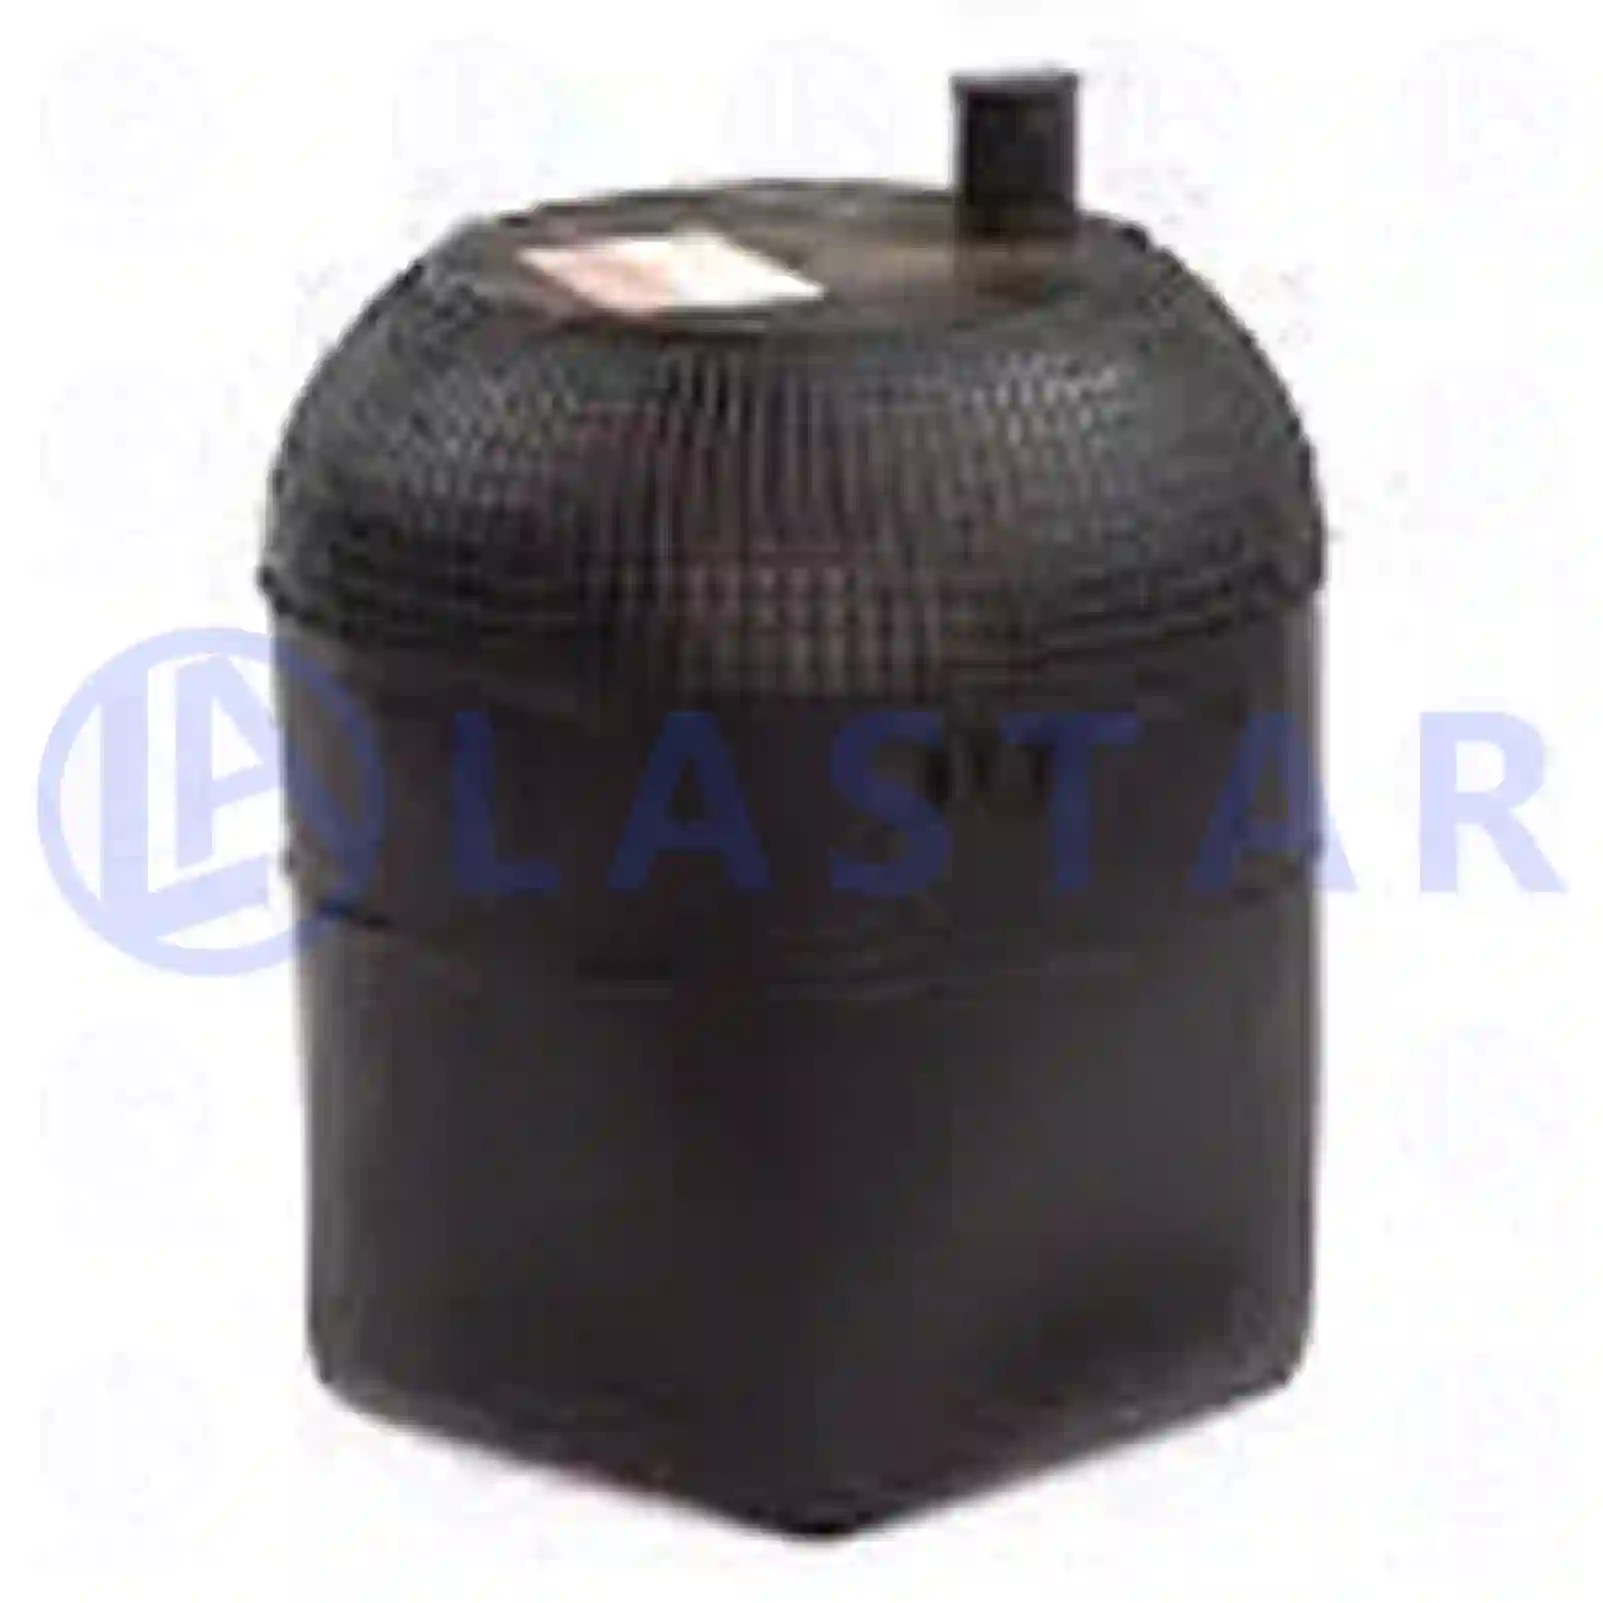 Air spring, without piston, 77728223, 9423270001, , , , ||  77728223 Lastar Spare Part | Truck Spare Parts, Auotomotive Spare Parts Air spring, without piston, 77728223, 9423270001, , , , ||  77728223 Lastar Spare Part | Truck Spare Parts, Auotomotive Spare Parts